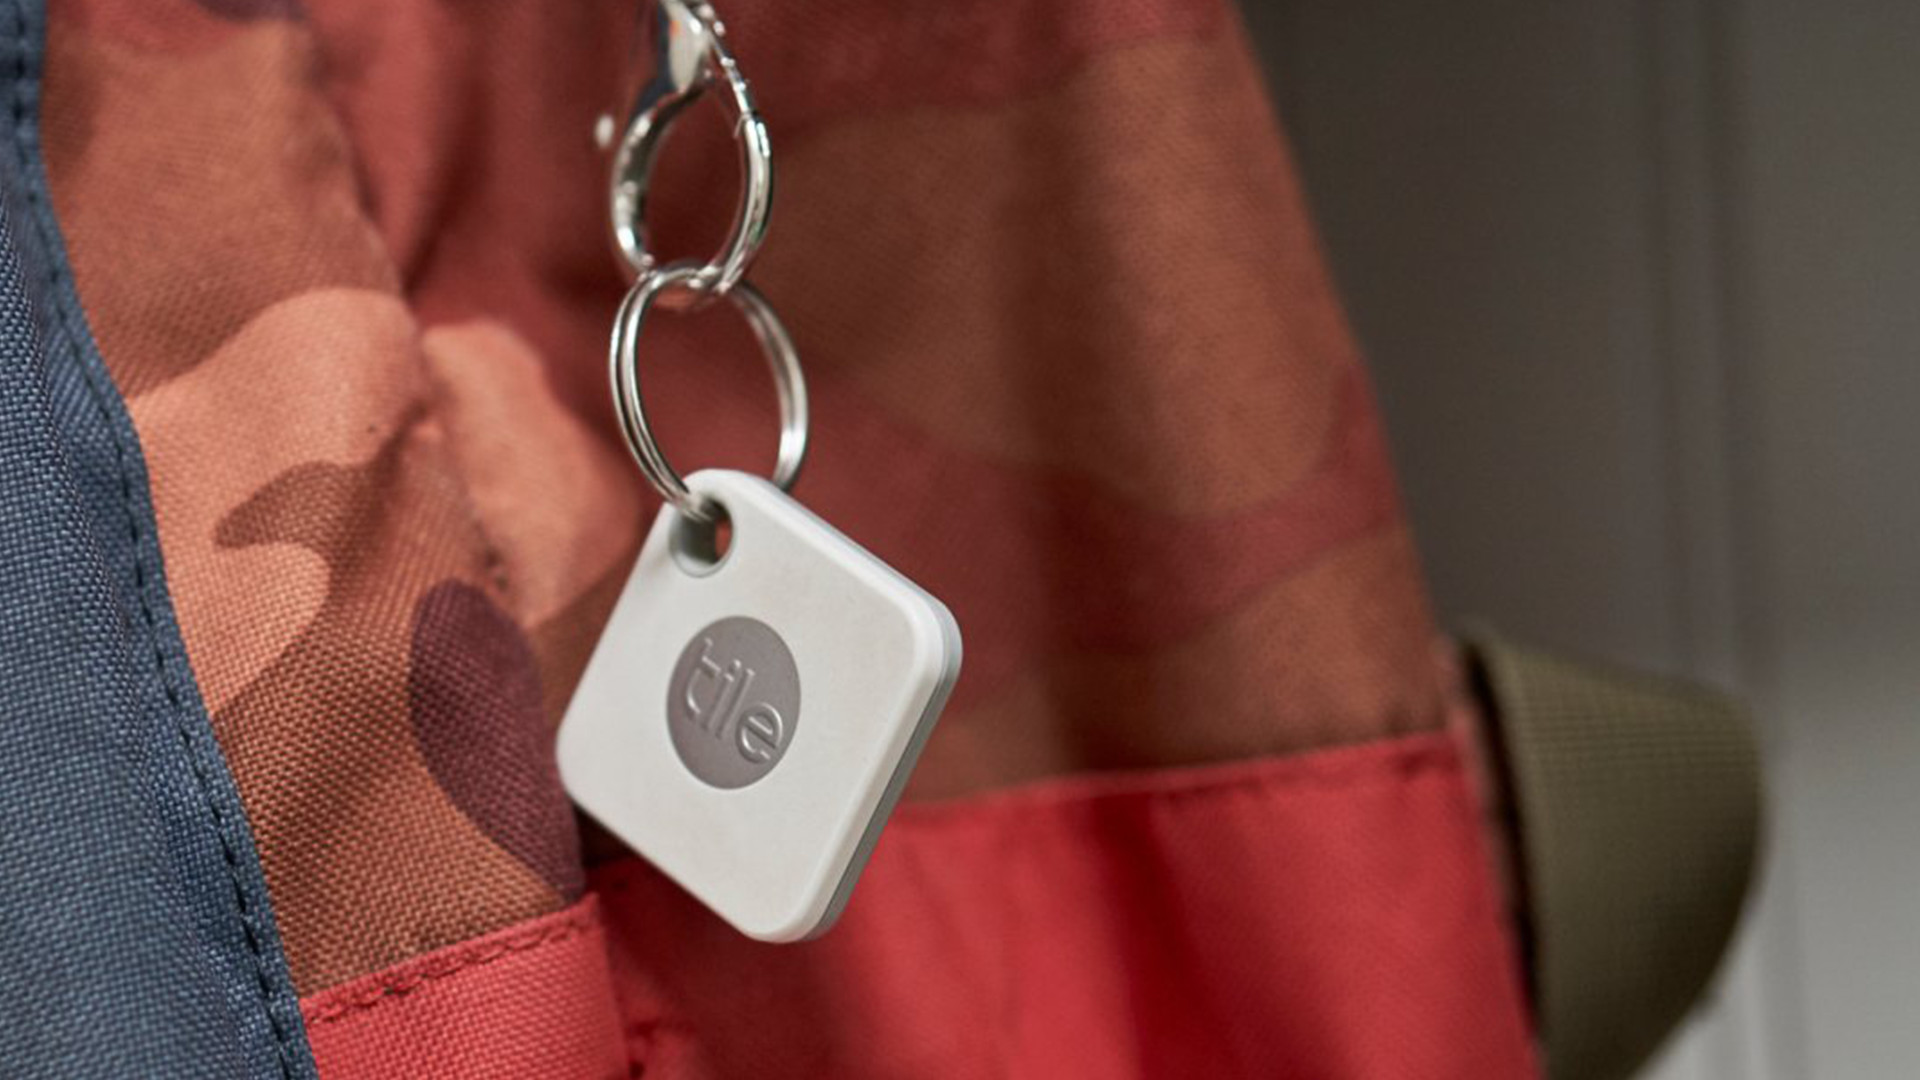 The biggest risks of using Bluetooth trackers like Apple AirTag, Tile